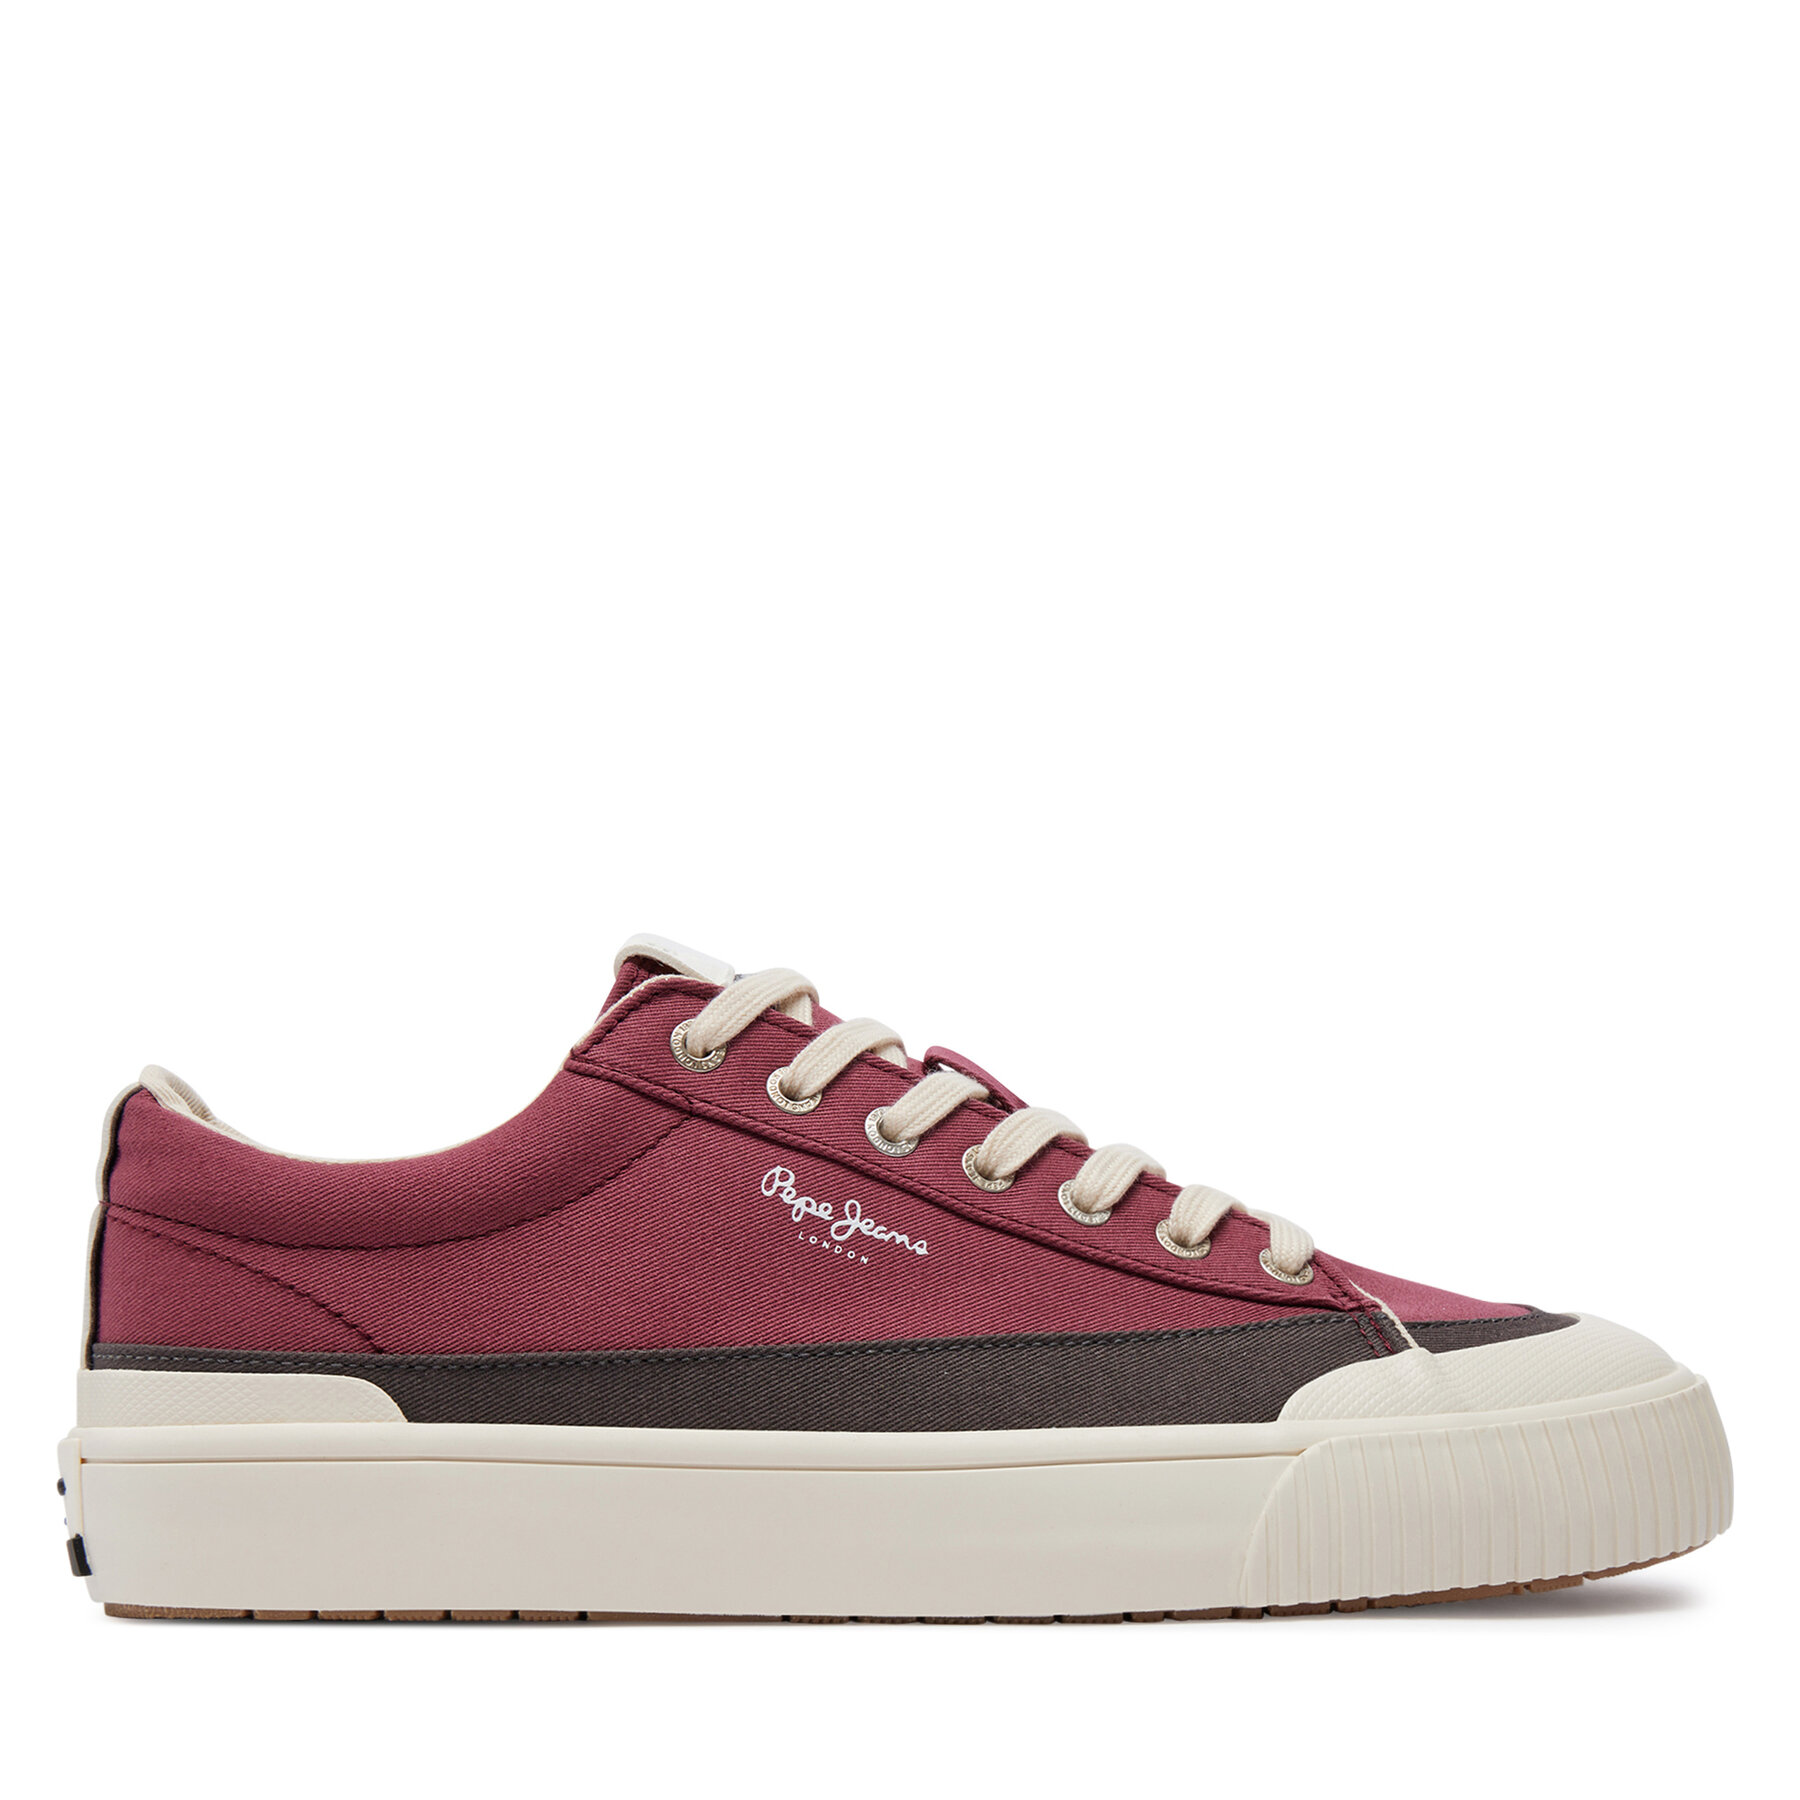 Sneakers aus Stoff Pepe Jeans Ben Band M PMS31043 Ruby Wine Red 293 von Pepe Jeans